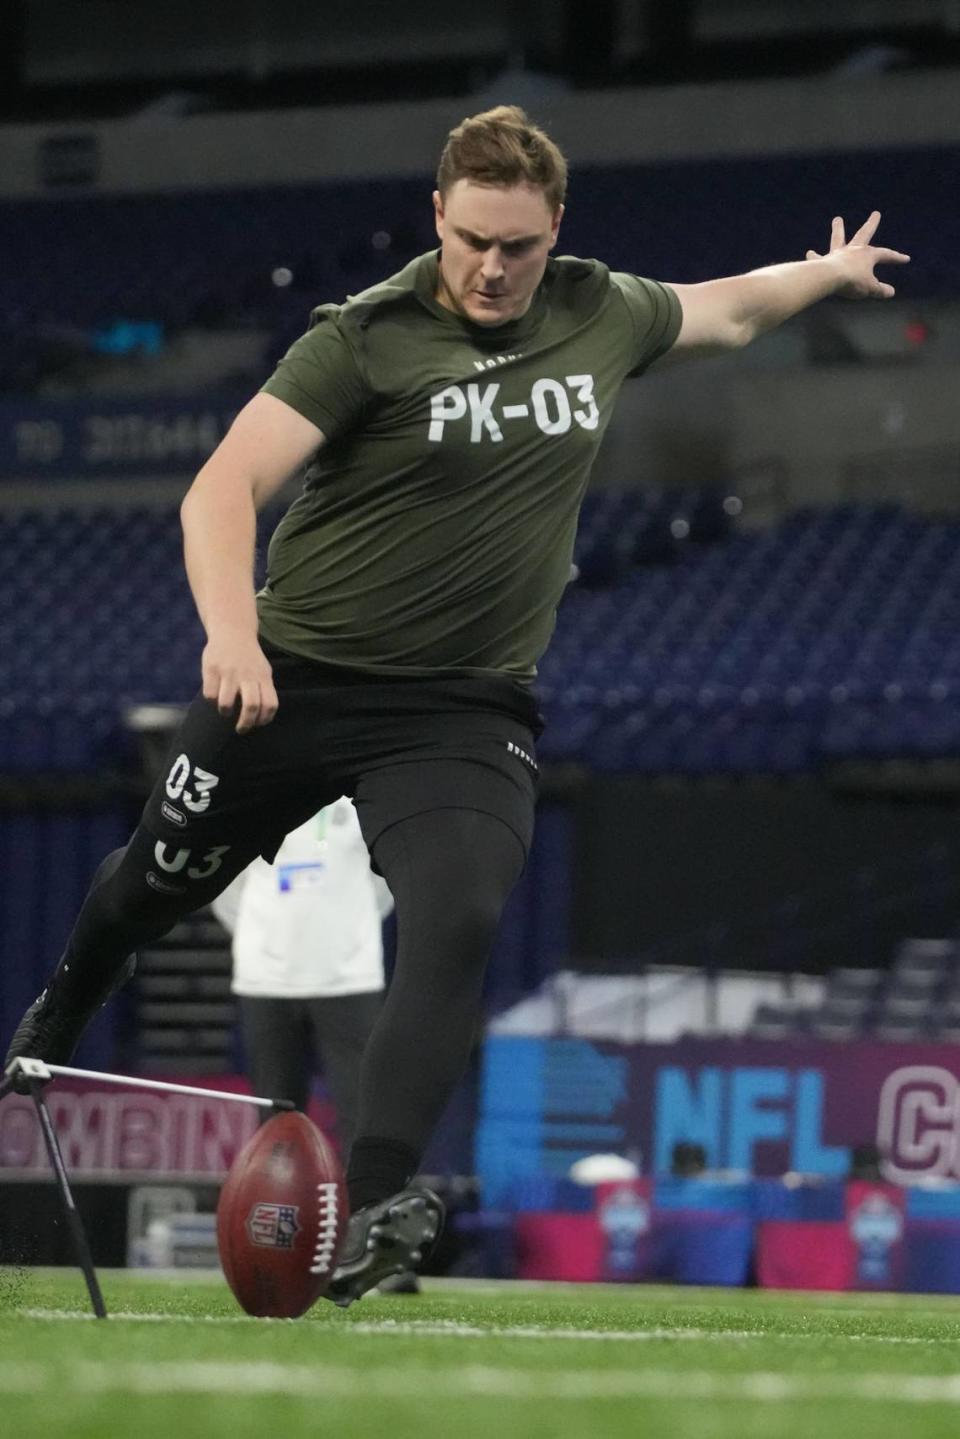 Mar 3, 2024; Indianapolis, IN, USA; Missouri place kicker Harrison Mevis (PK03) during the 2024 NFL Combine at Lucas Oil Stadium. Mandatory Credit: Kirby Lee-USA TODAY Sports